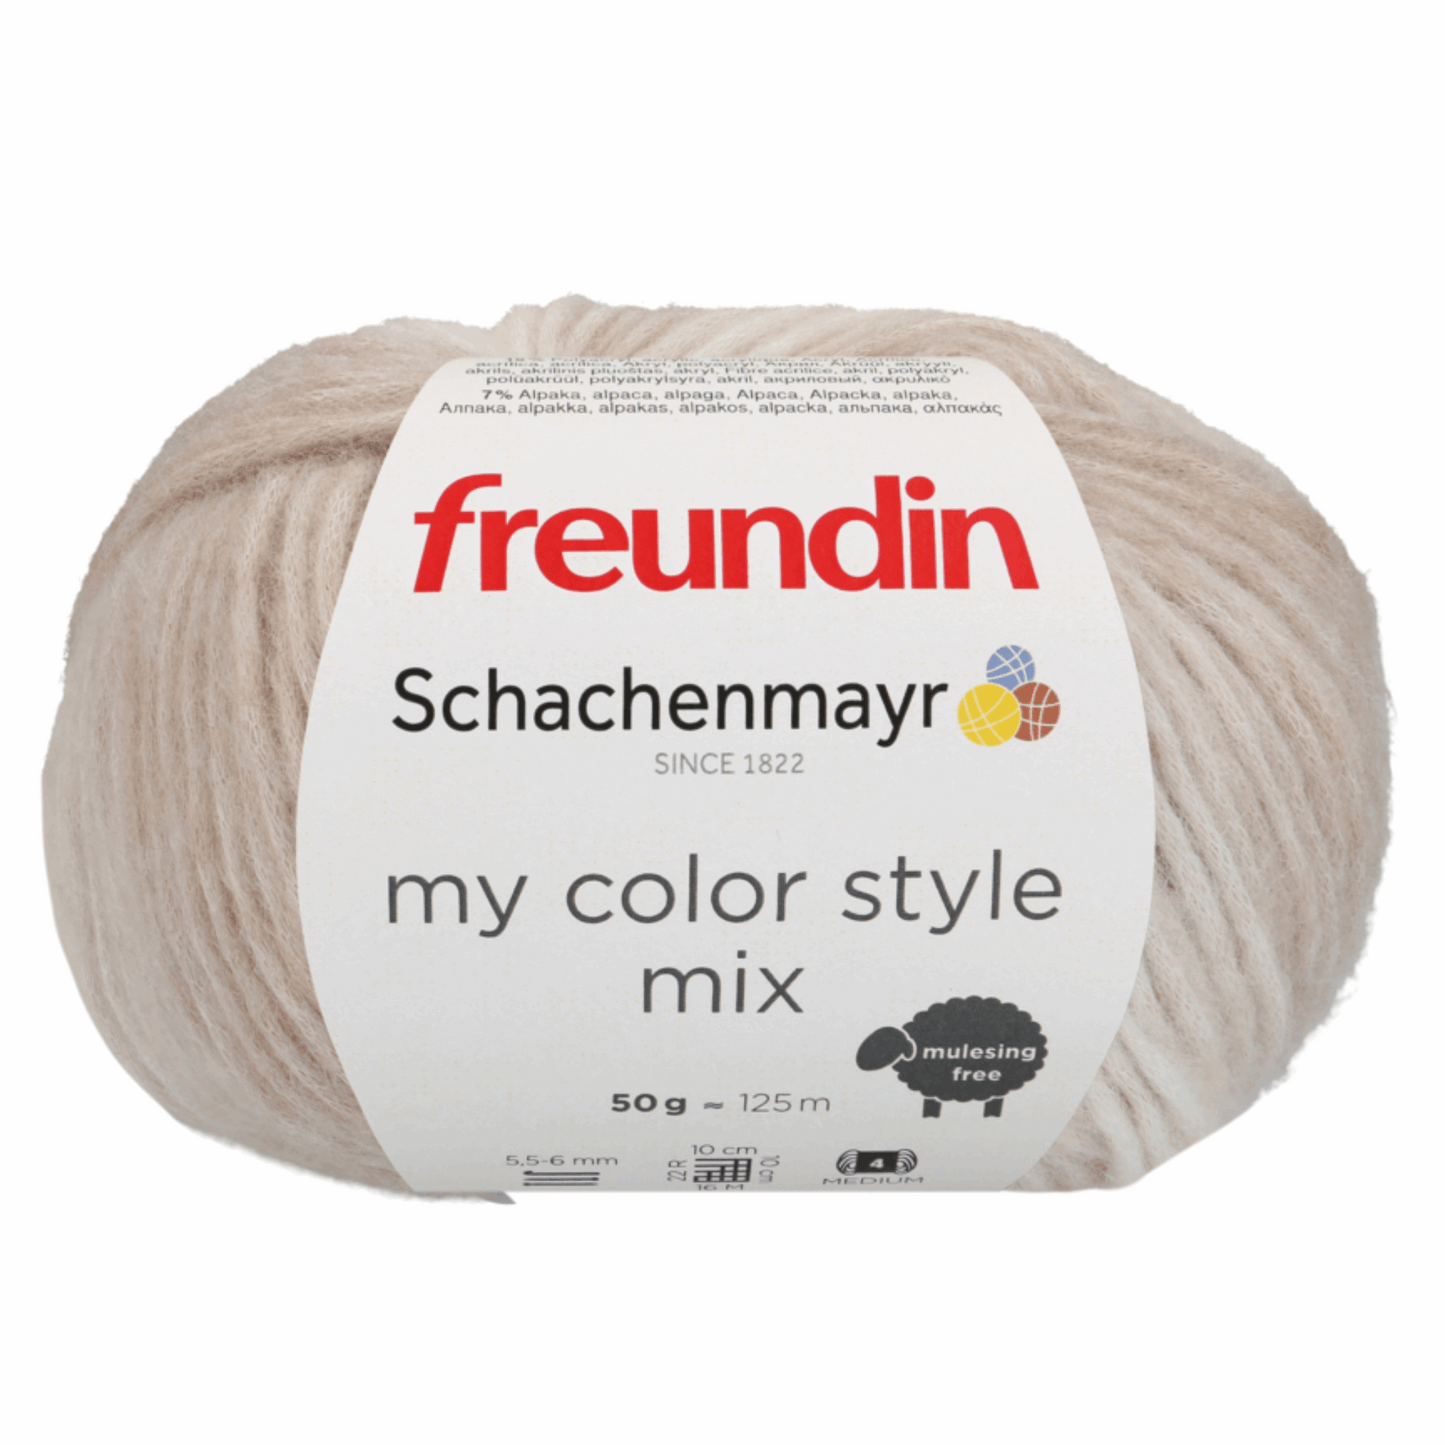 Schachenmayr My Color Style Mix 50g, 97118, Farbe sand 80